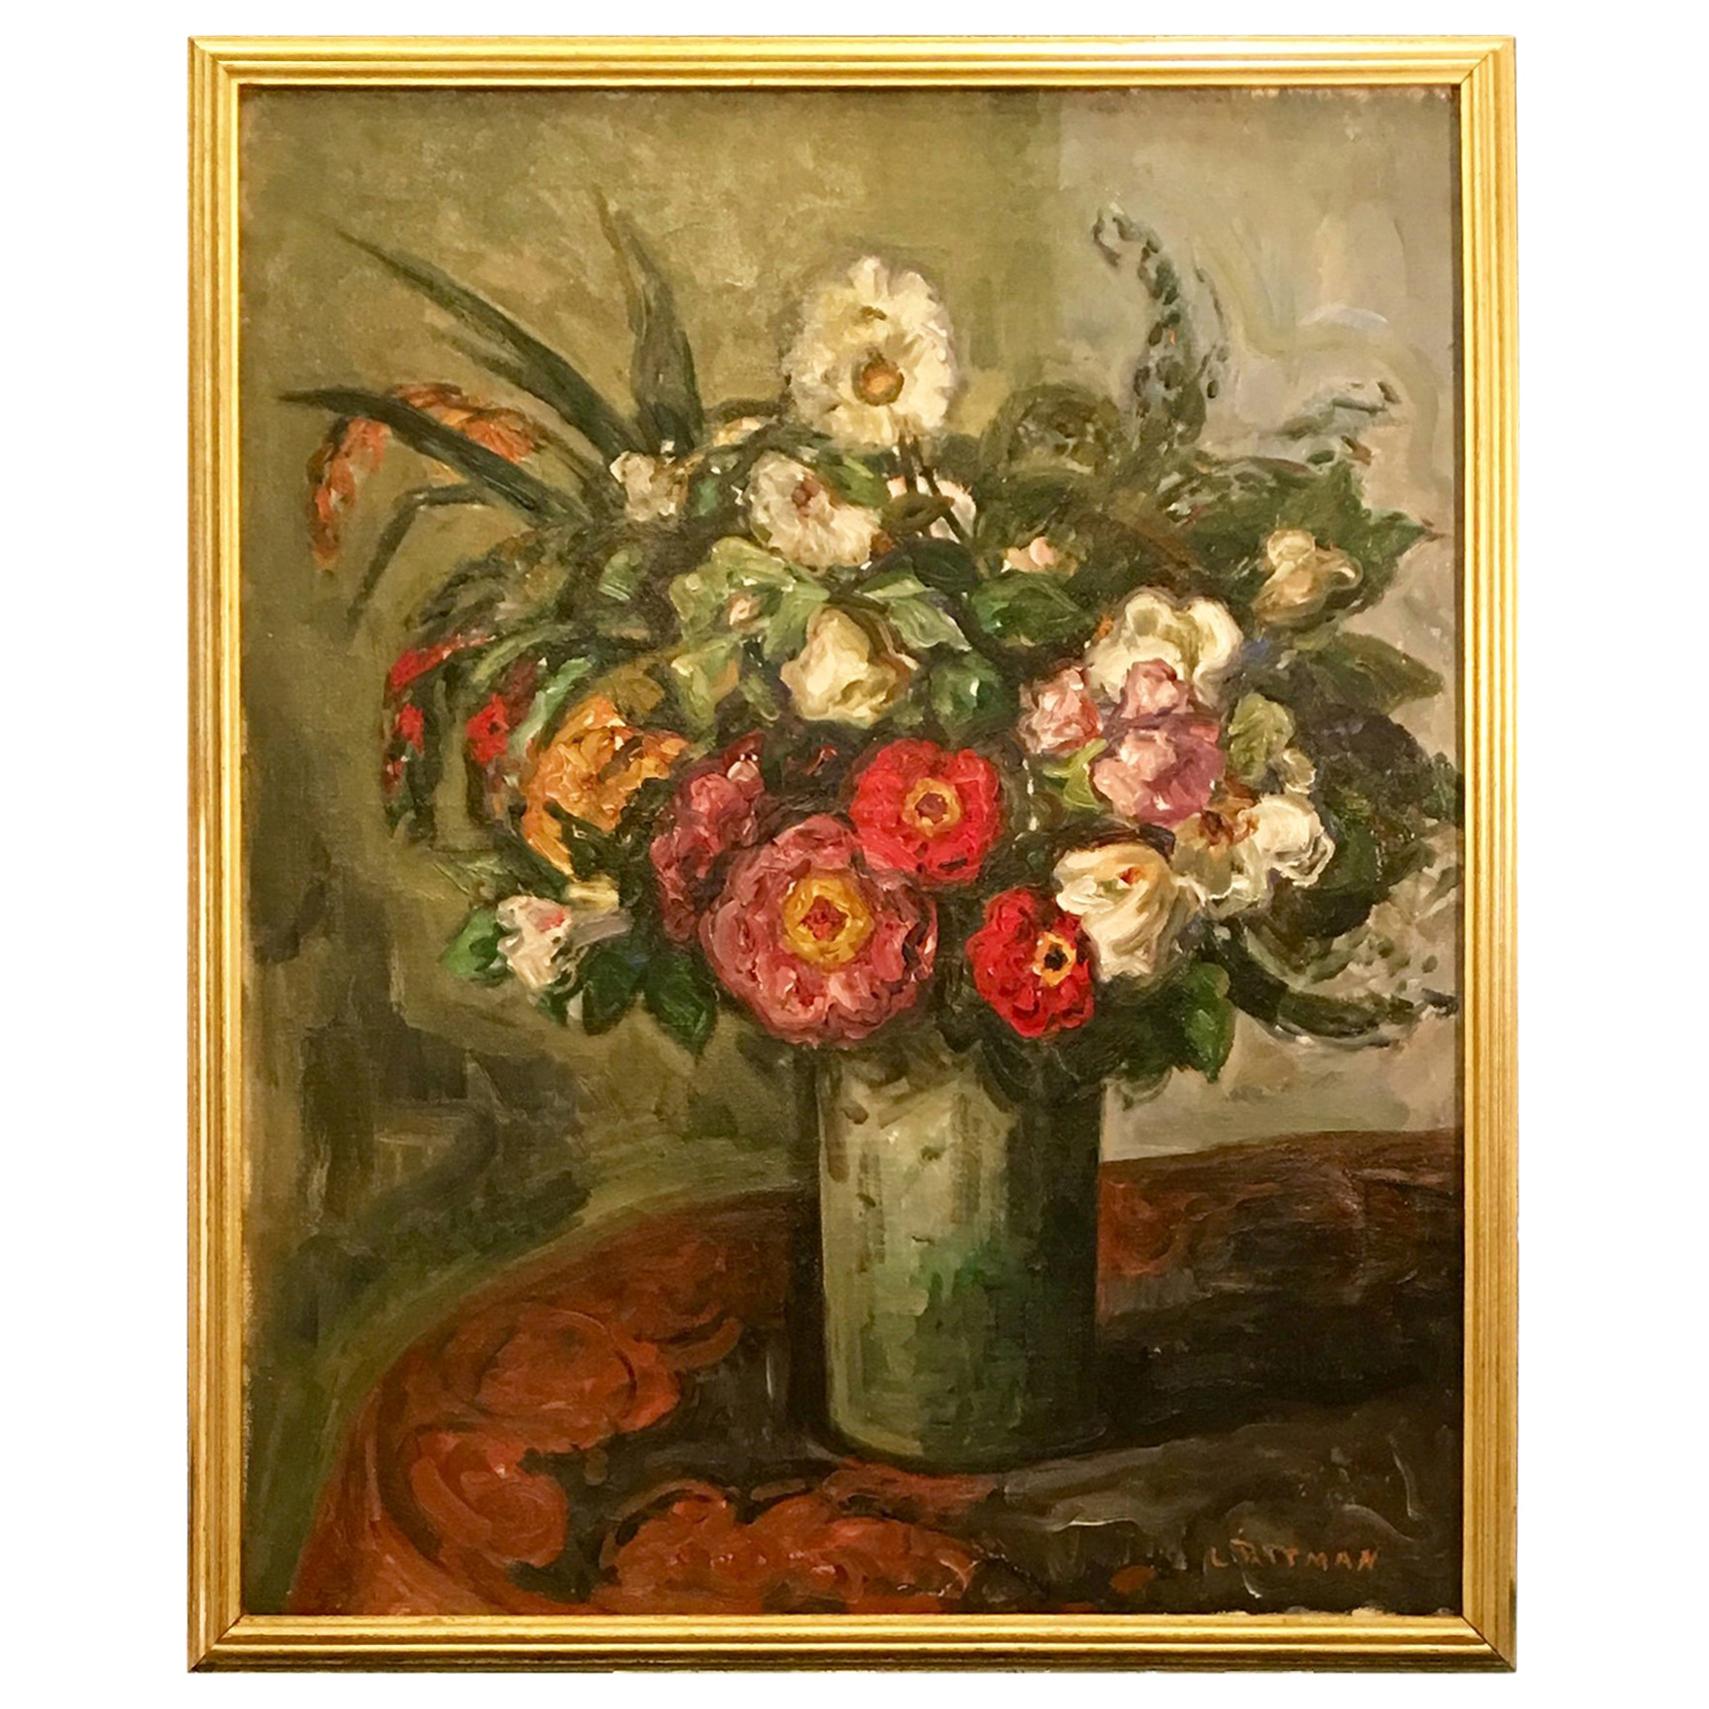 Original Louis Ritman Impressionist Still Life Oil Painting of Flowers in a Vase